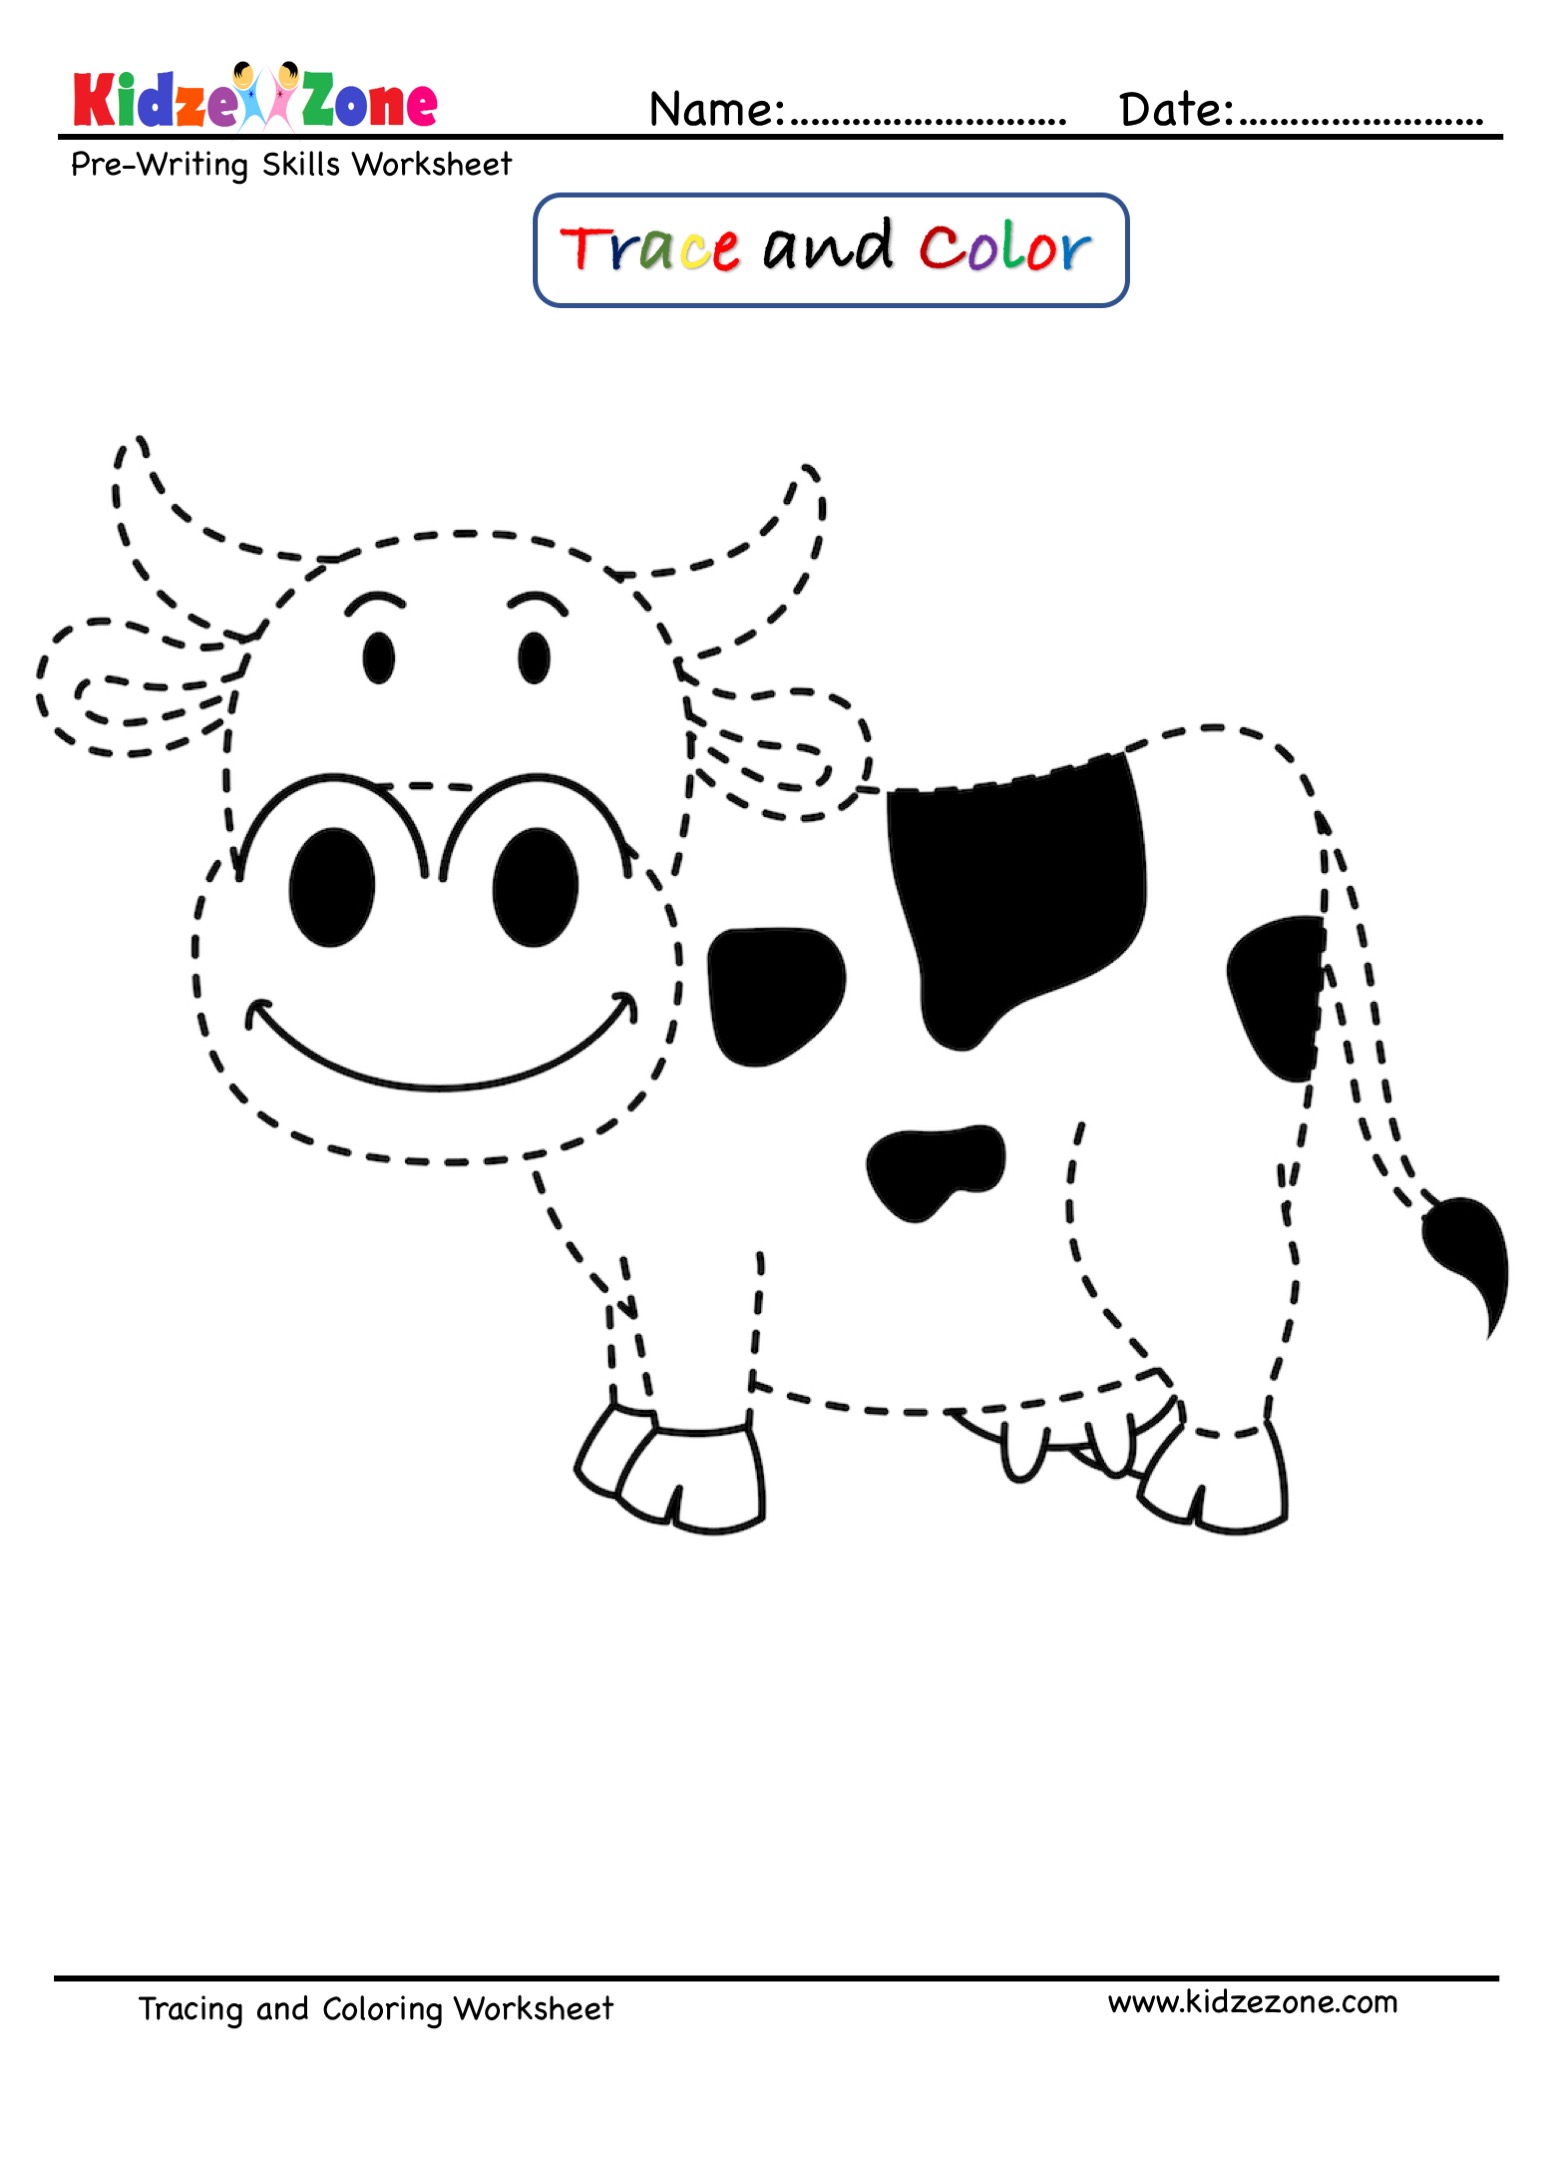 Cow Cartoon Trace and Color Worksheet - KidzeZone